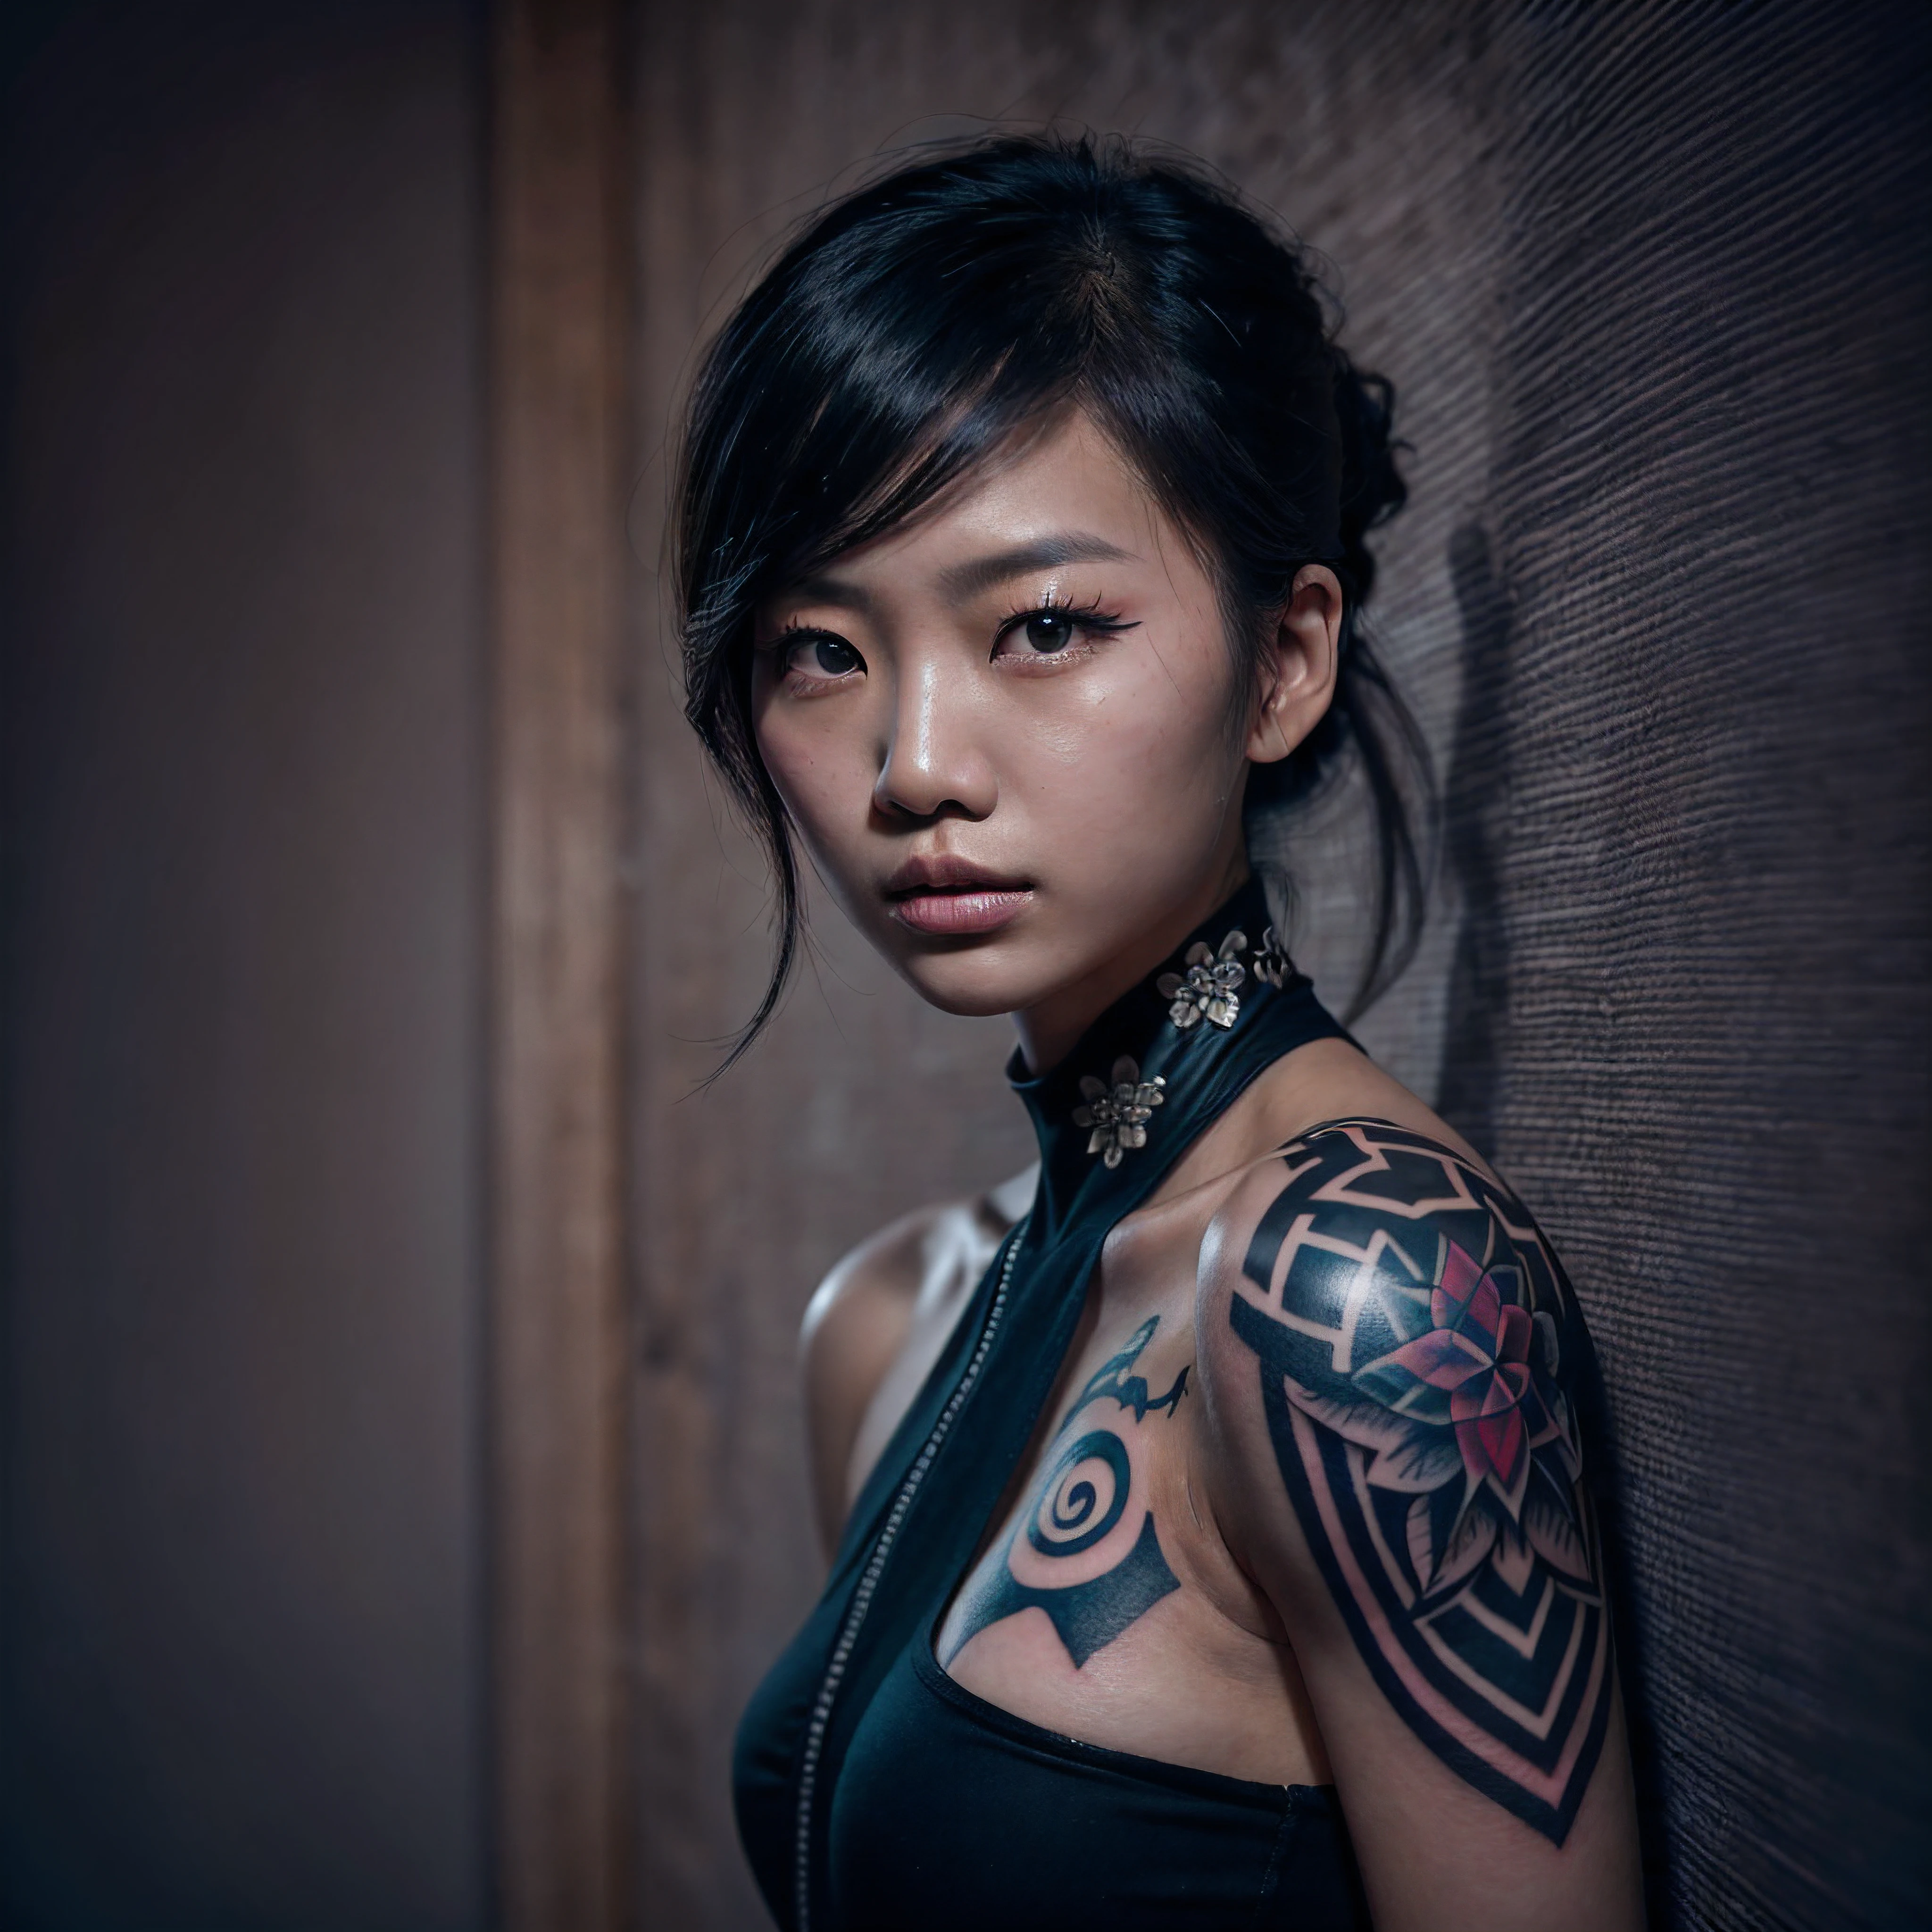 (intimate portrait, complex composition:1.3), (detailed and expressive eyes:1.6), (futuristic style), (An intimate portrait of an Asian woman showing her entire body covered with black geometric tattoos:1.3), (closed mouth:1.2), (authentic expression in her eyes: 1.2), wearing dark smoke eye makeup, the photograph captured in stunning 8k resolution and raw format to preserve the highest quality of details. she wears elegant futuristic clothing, (bare shoulders, small covered breasts:1.3), (her eyes are portrayed with meticulous attention to detail: 1.3), The photograph is taken with a lens that emphasizes the depth in her eyes, (wind billows around her), and the backdrop is a dark studio setting that enhances the colours of the scene. The lighting and shadows are expertly crafted to bring out the richness of her skin tone and the intense atmosphere. Her creative hair adds a touch of contrast against her skin, The overall composition captures her essence with authenticity and grace, creating a portrait that celebrates her heritage and beauty. Photography utilizing the best techniques for shadow and lighting, to create a mesmerizing portrayal that transcends the visual, slightly tilted head,